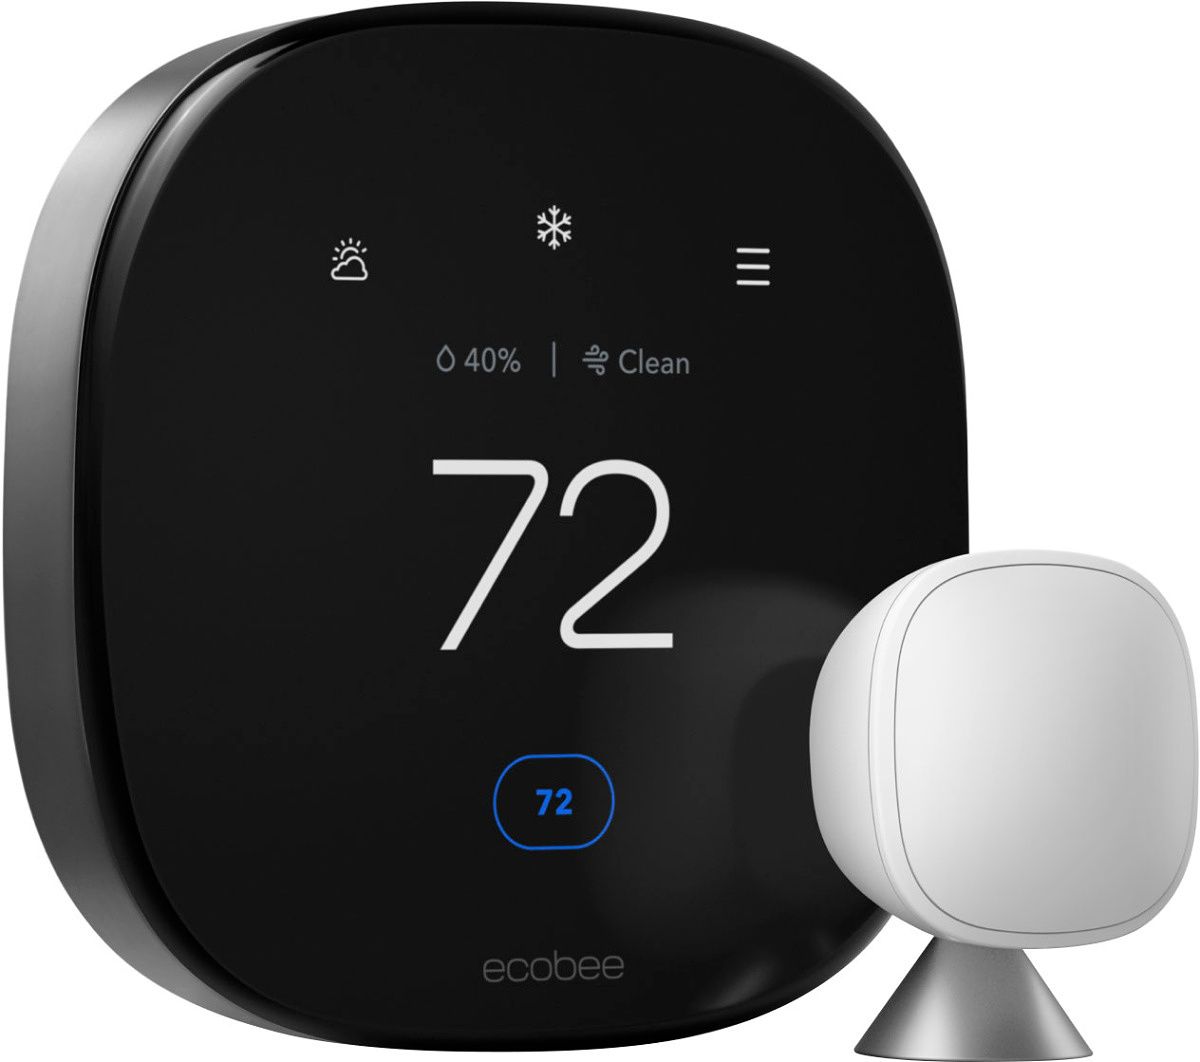 No more plastic, an integrated smart speaker, better UI and a new air quality monitor make this Ecobee's best thermostat yet.